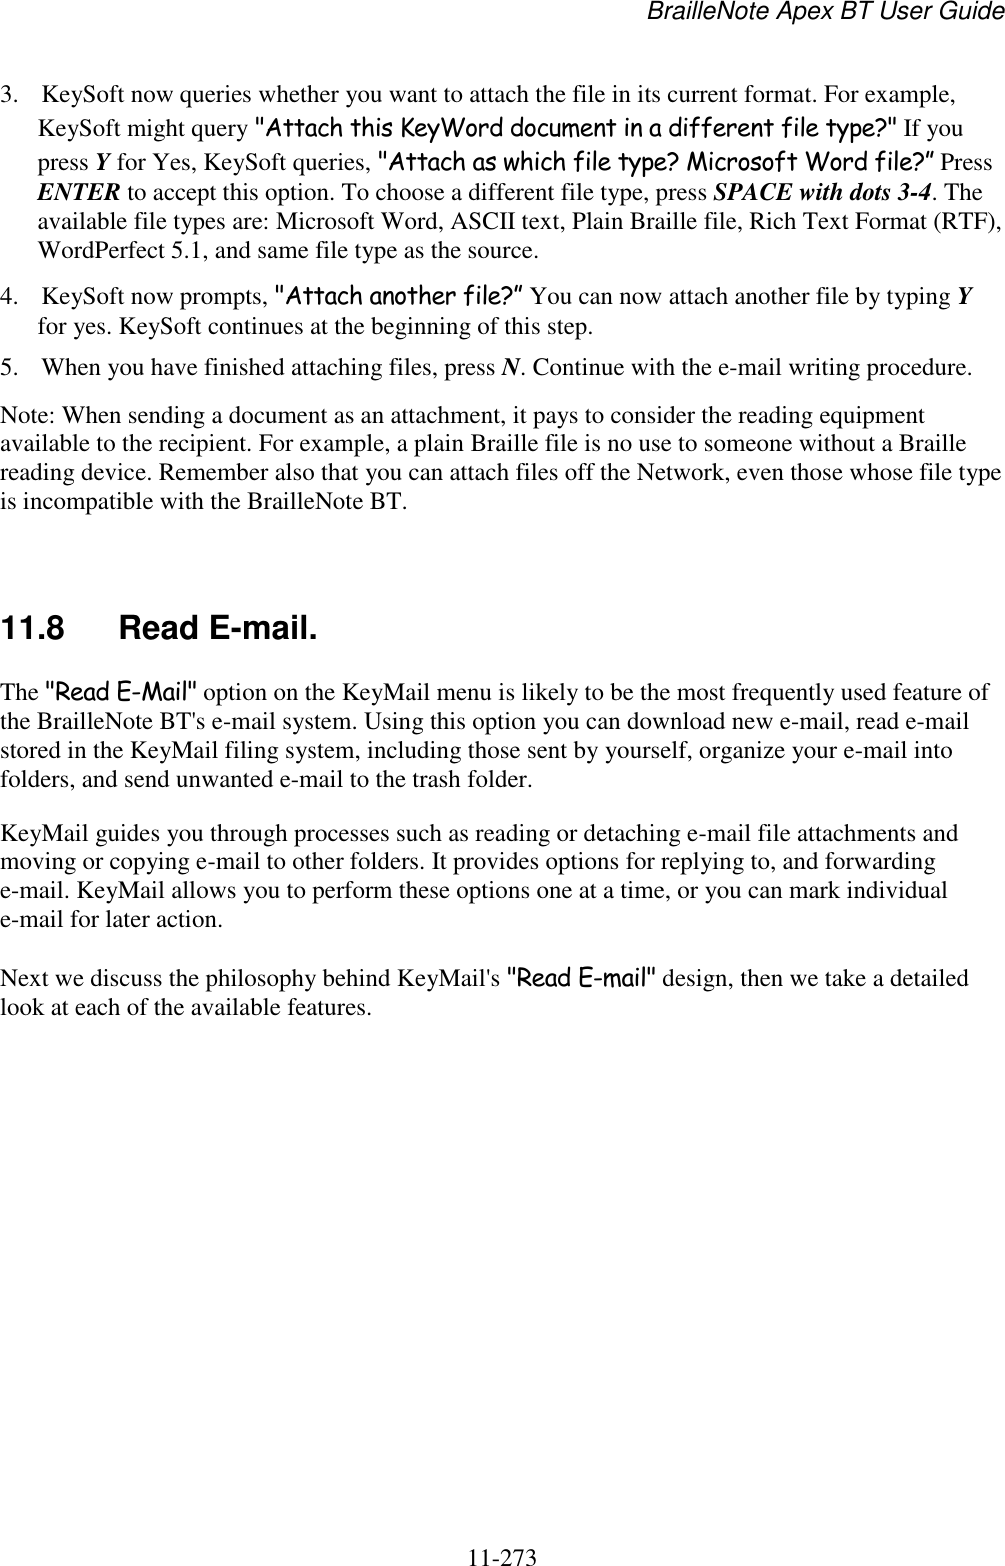 BrailleNote Apex BT User Guide   11-273   3. KeySoft now queries whether you want to attach the file in its current format. For example, KeySoft might query &quot;Attach this KeyWord document in a different file type?&quot; If you press Y for Yes, KeySoft queries, &quot;Attach as which file type? Microsoft Word file?” Press ENTER to accept this option. To choose a different file type, press SPACE with dots 3-4. The available file types are: Microsoft Word, ASCII text, Plain Braille file, Rich Text Format (RTF), WordPerfect 5.1, and same file type as the source. 4. KeySoft now prompts, &quot;Attach another file?” You can now attach another file by typing Y for yes. KeySoft continues at the beginning of this step. 5. When you have finished attaching files, press N. Continue with the e-mail writing procedure. Note: When sending a document as an attachment, it pays to consider the reading equipment available to the recipient. For example, a plain Braille file is no use to someone without a Braille reading device. Remember also that you can attach files off the Network, even those whose file type is incompatible with the BrailleNote BT.   11.8  Read E-mail. The &quot;Read E-Mail&quot; option on the KeyMail menu is likely to be the most frequently used feature of the BrailleNote BT&apos;s e-mail system. Using this option you can download new e-mail, read e-mail stored in the KeyMail filing system, including those sent by yourself, organize your e-mail into folders, and send unwanted e-mail to the trash folder. KeyMail guides you through processes such as reading or detaching e-mail file attachments and moving or copying e-mail to other folders. It provides options for replying to, and forwarding e-mail. KeyMail allows you to perform these options one at a time, or you can mark individual e-mail for later action. Next we discuss the philosophy behind KeyMail&apos;s &quot;Read E-mail&quot; design, then we take a detailed look at each of the available features.   